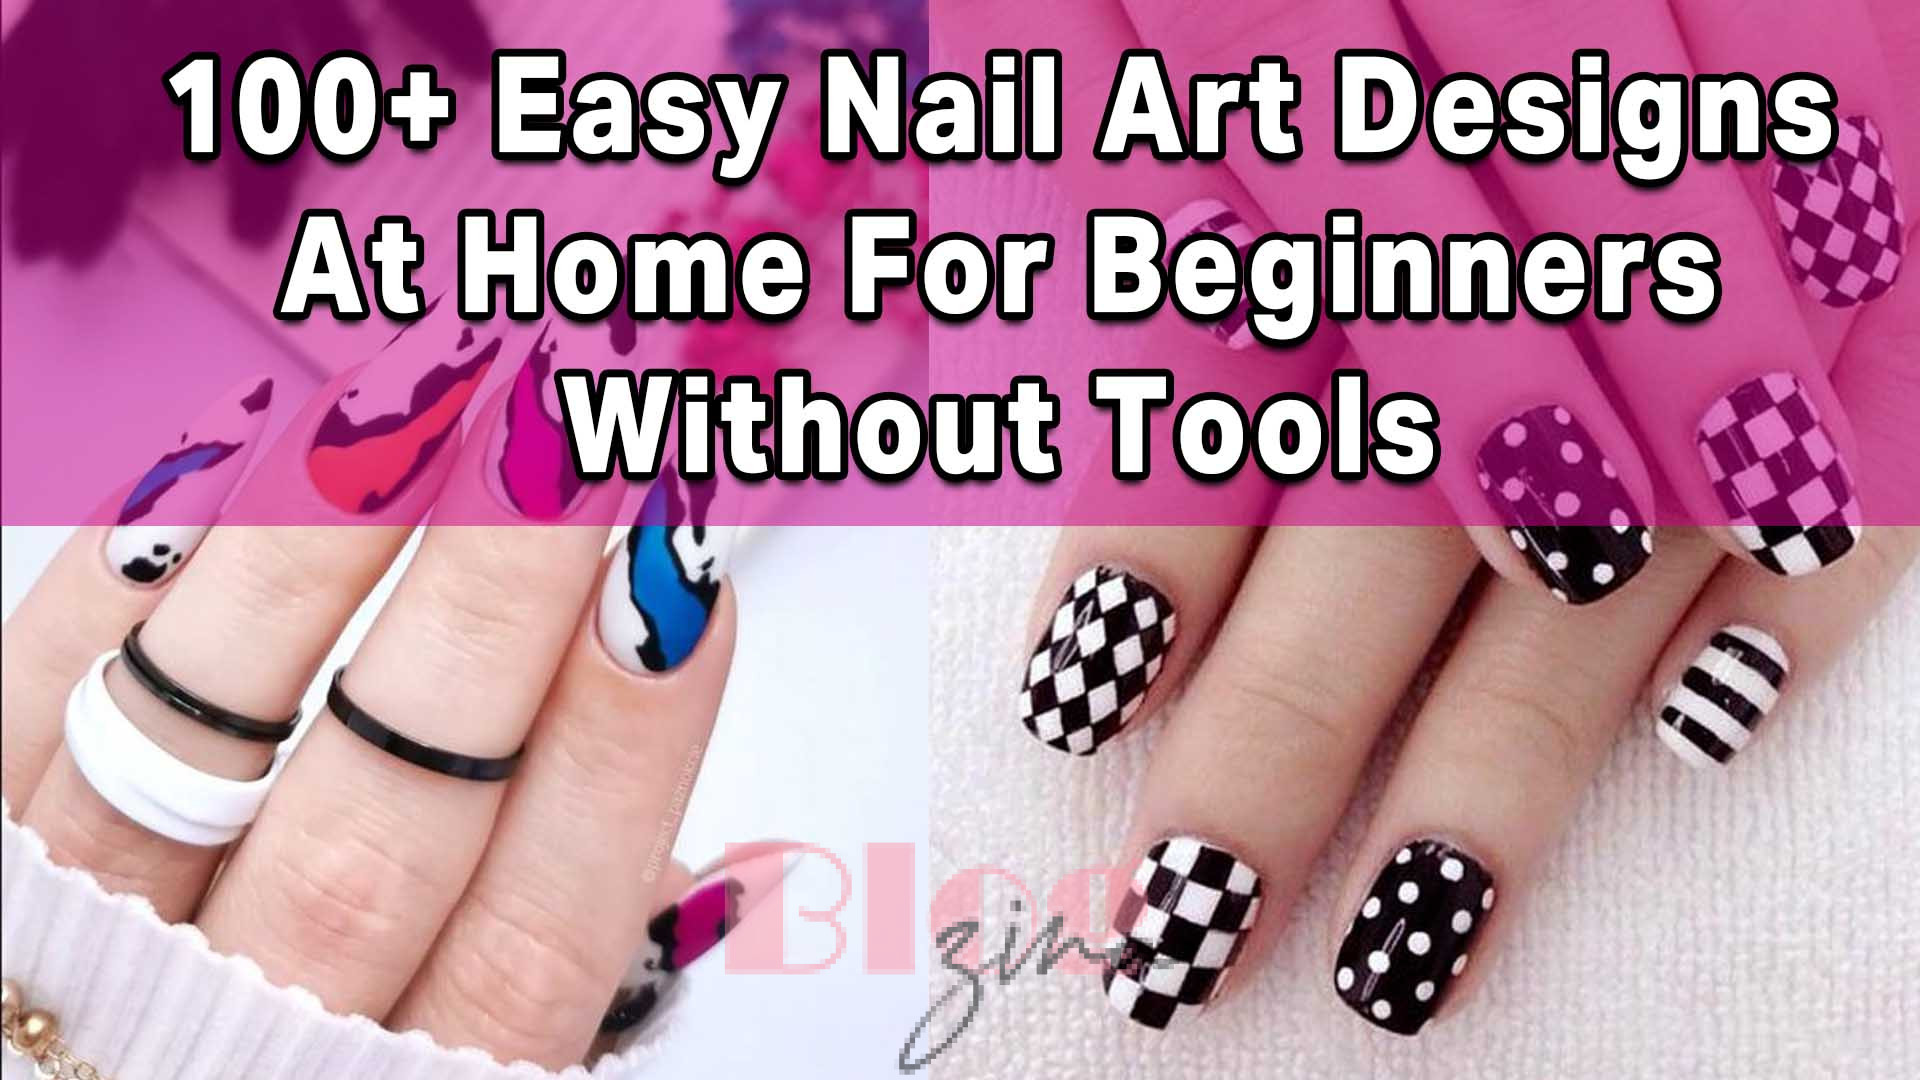 Easy Nail Art Designs At Home For Beginners Without Tools